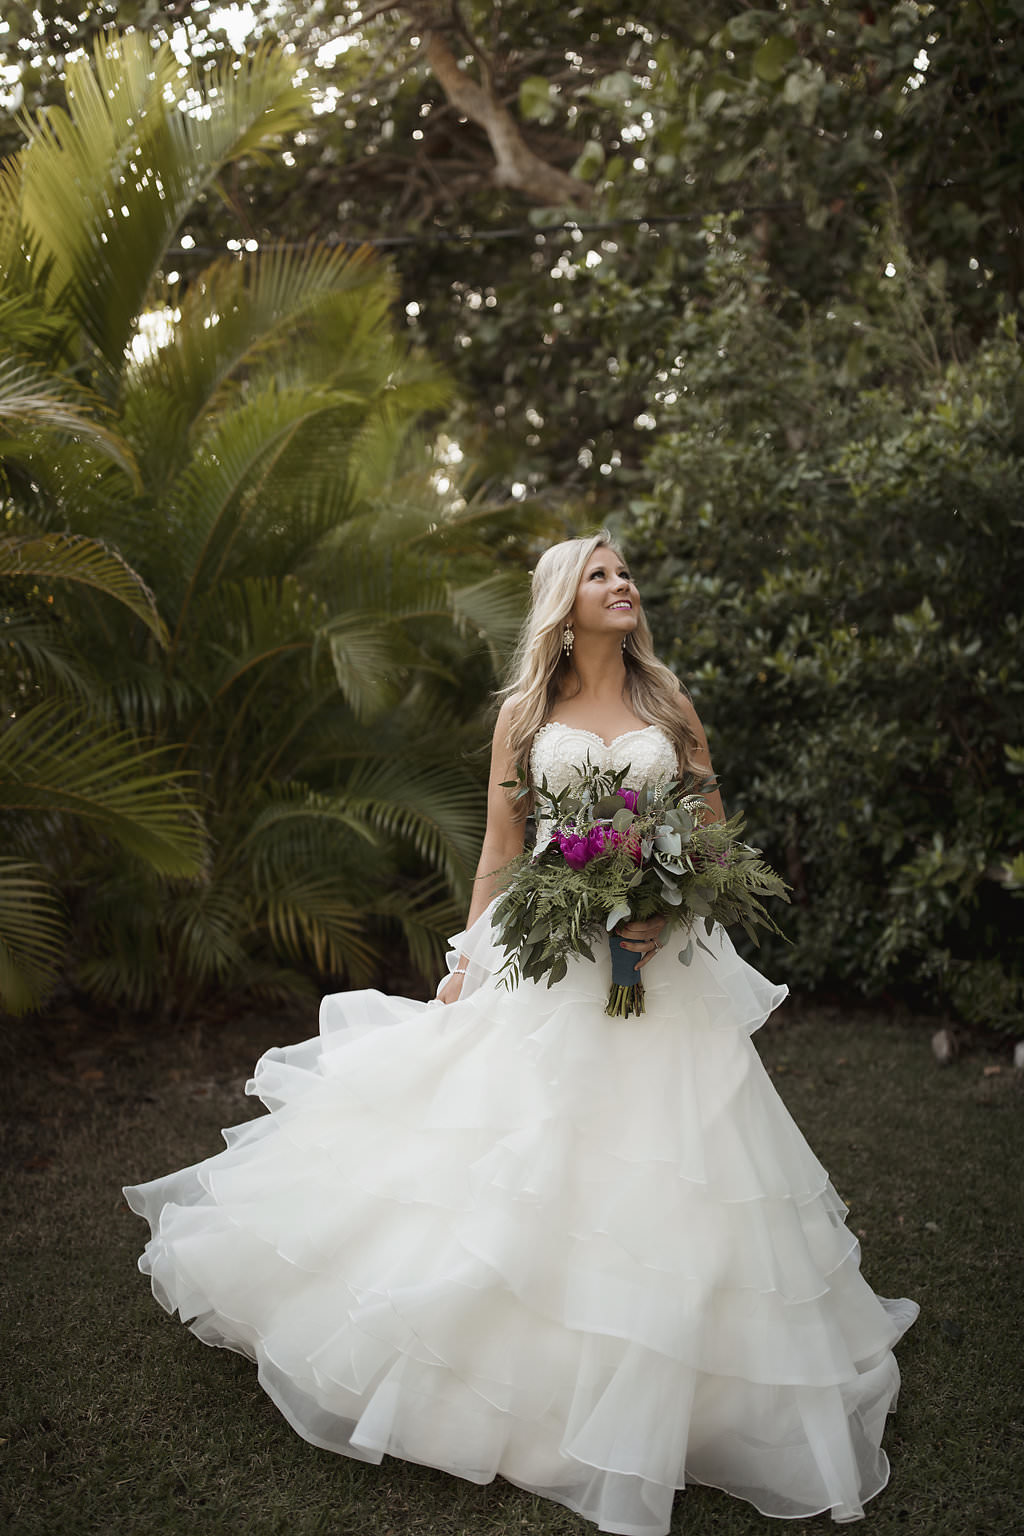 Outdoor Bridal Portrait In Strapless Layered Ballgown Wedding Dress with Fuchsia Floral and Greenery Bouquet Wrapped in Turquoise Ribbon | Jewel Toned Longboat Key Wedding